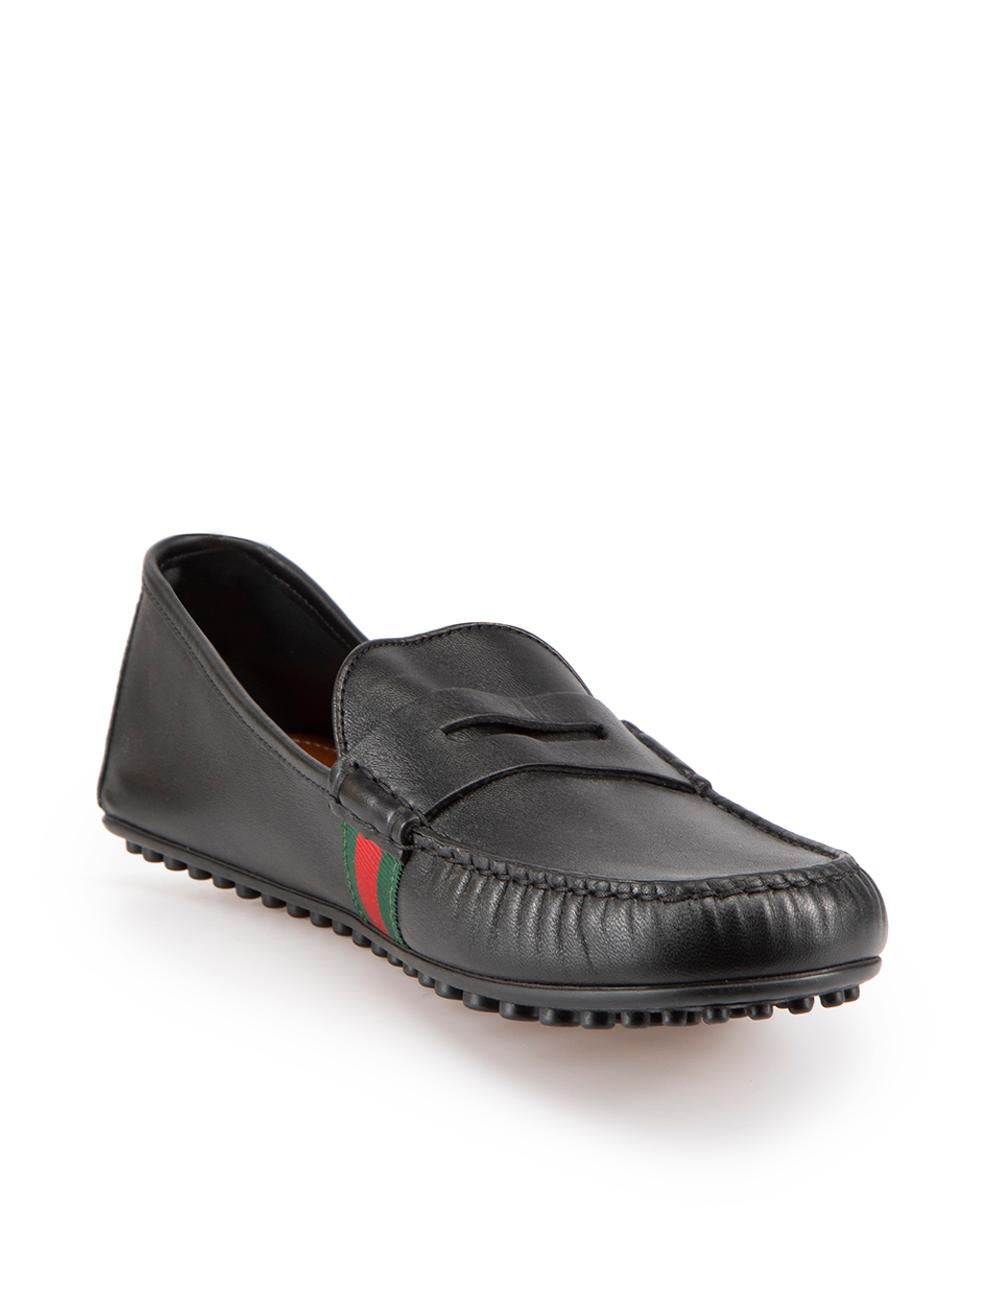 CONDITION is Never worn. No visible wear to loafers is evident, however slight creasing to leather is evident due to poor storage on this new Gucci designer resale item. This item comes with original dust bags and shoe